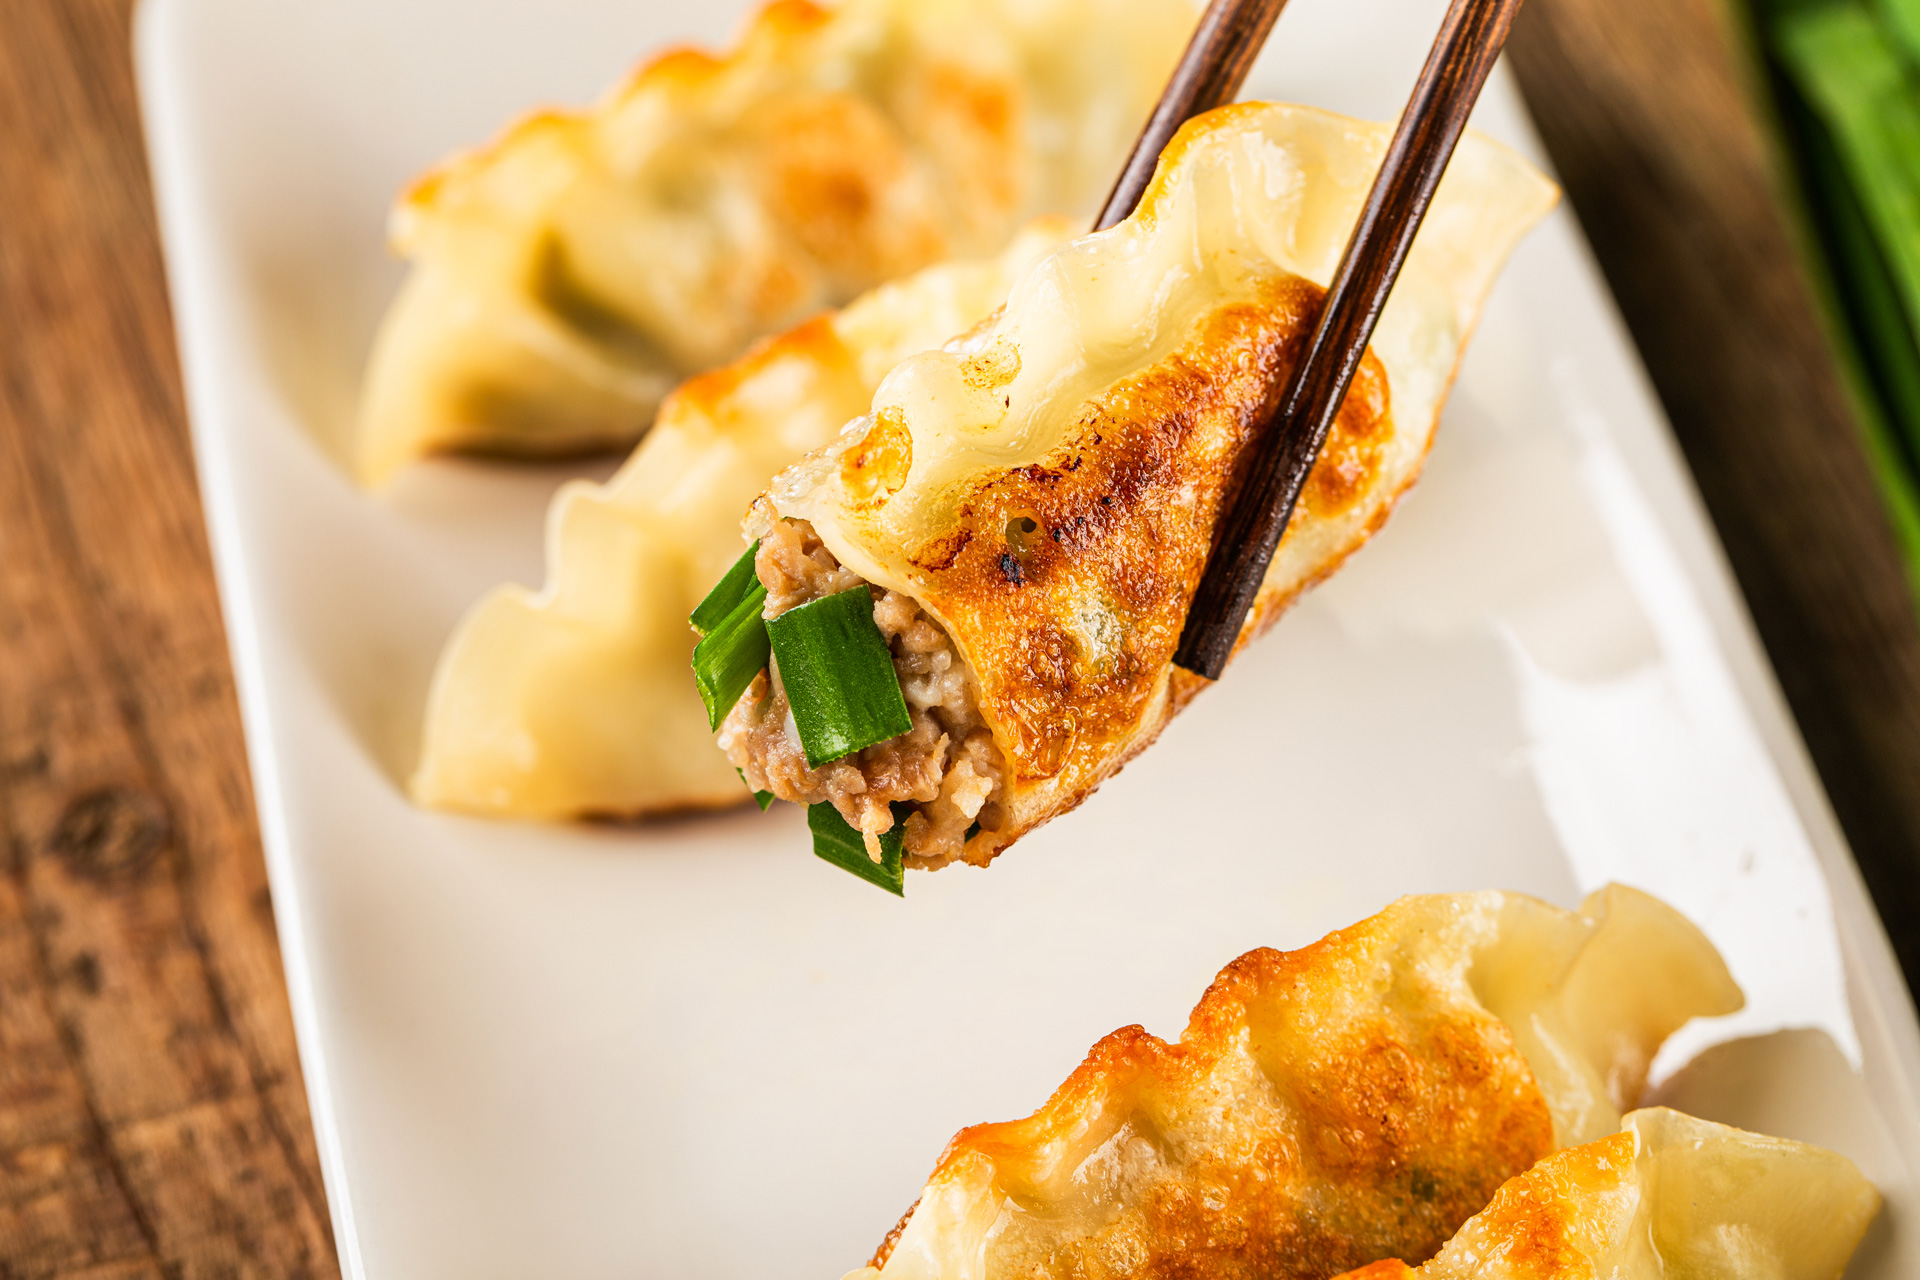 Making Chinese pork dumplings, also known as "Jiaozi," can be a fun and rewarding culinary experience. Here's a basic recipe to guide you through the process: